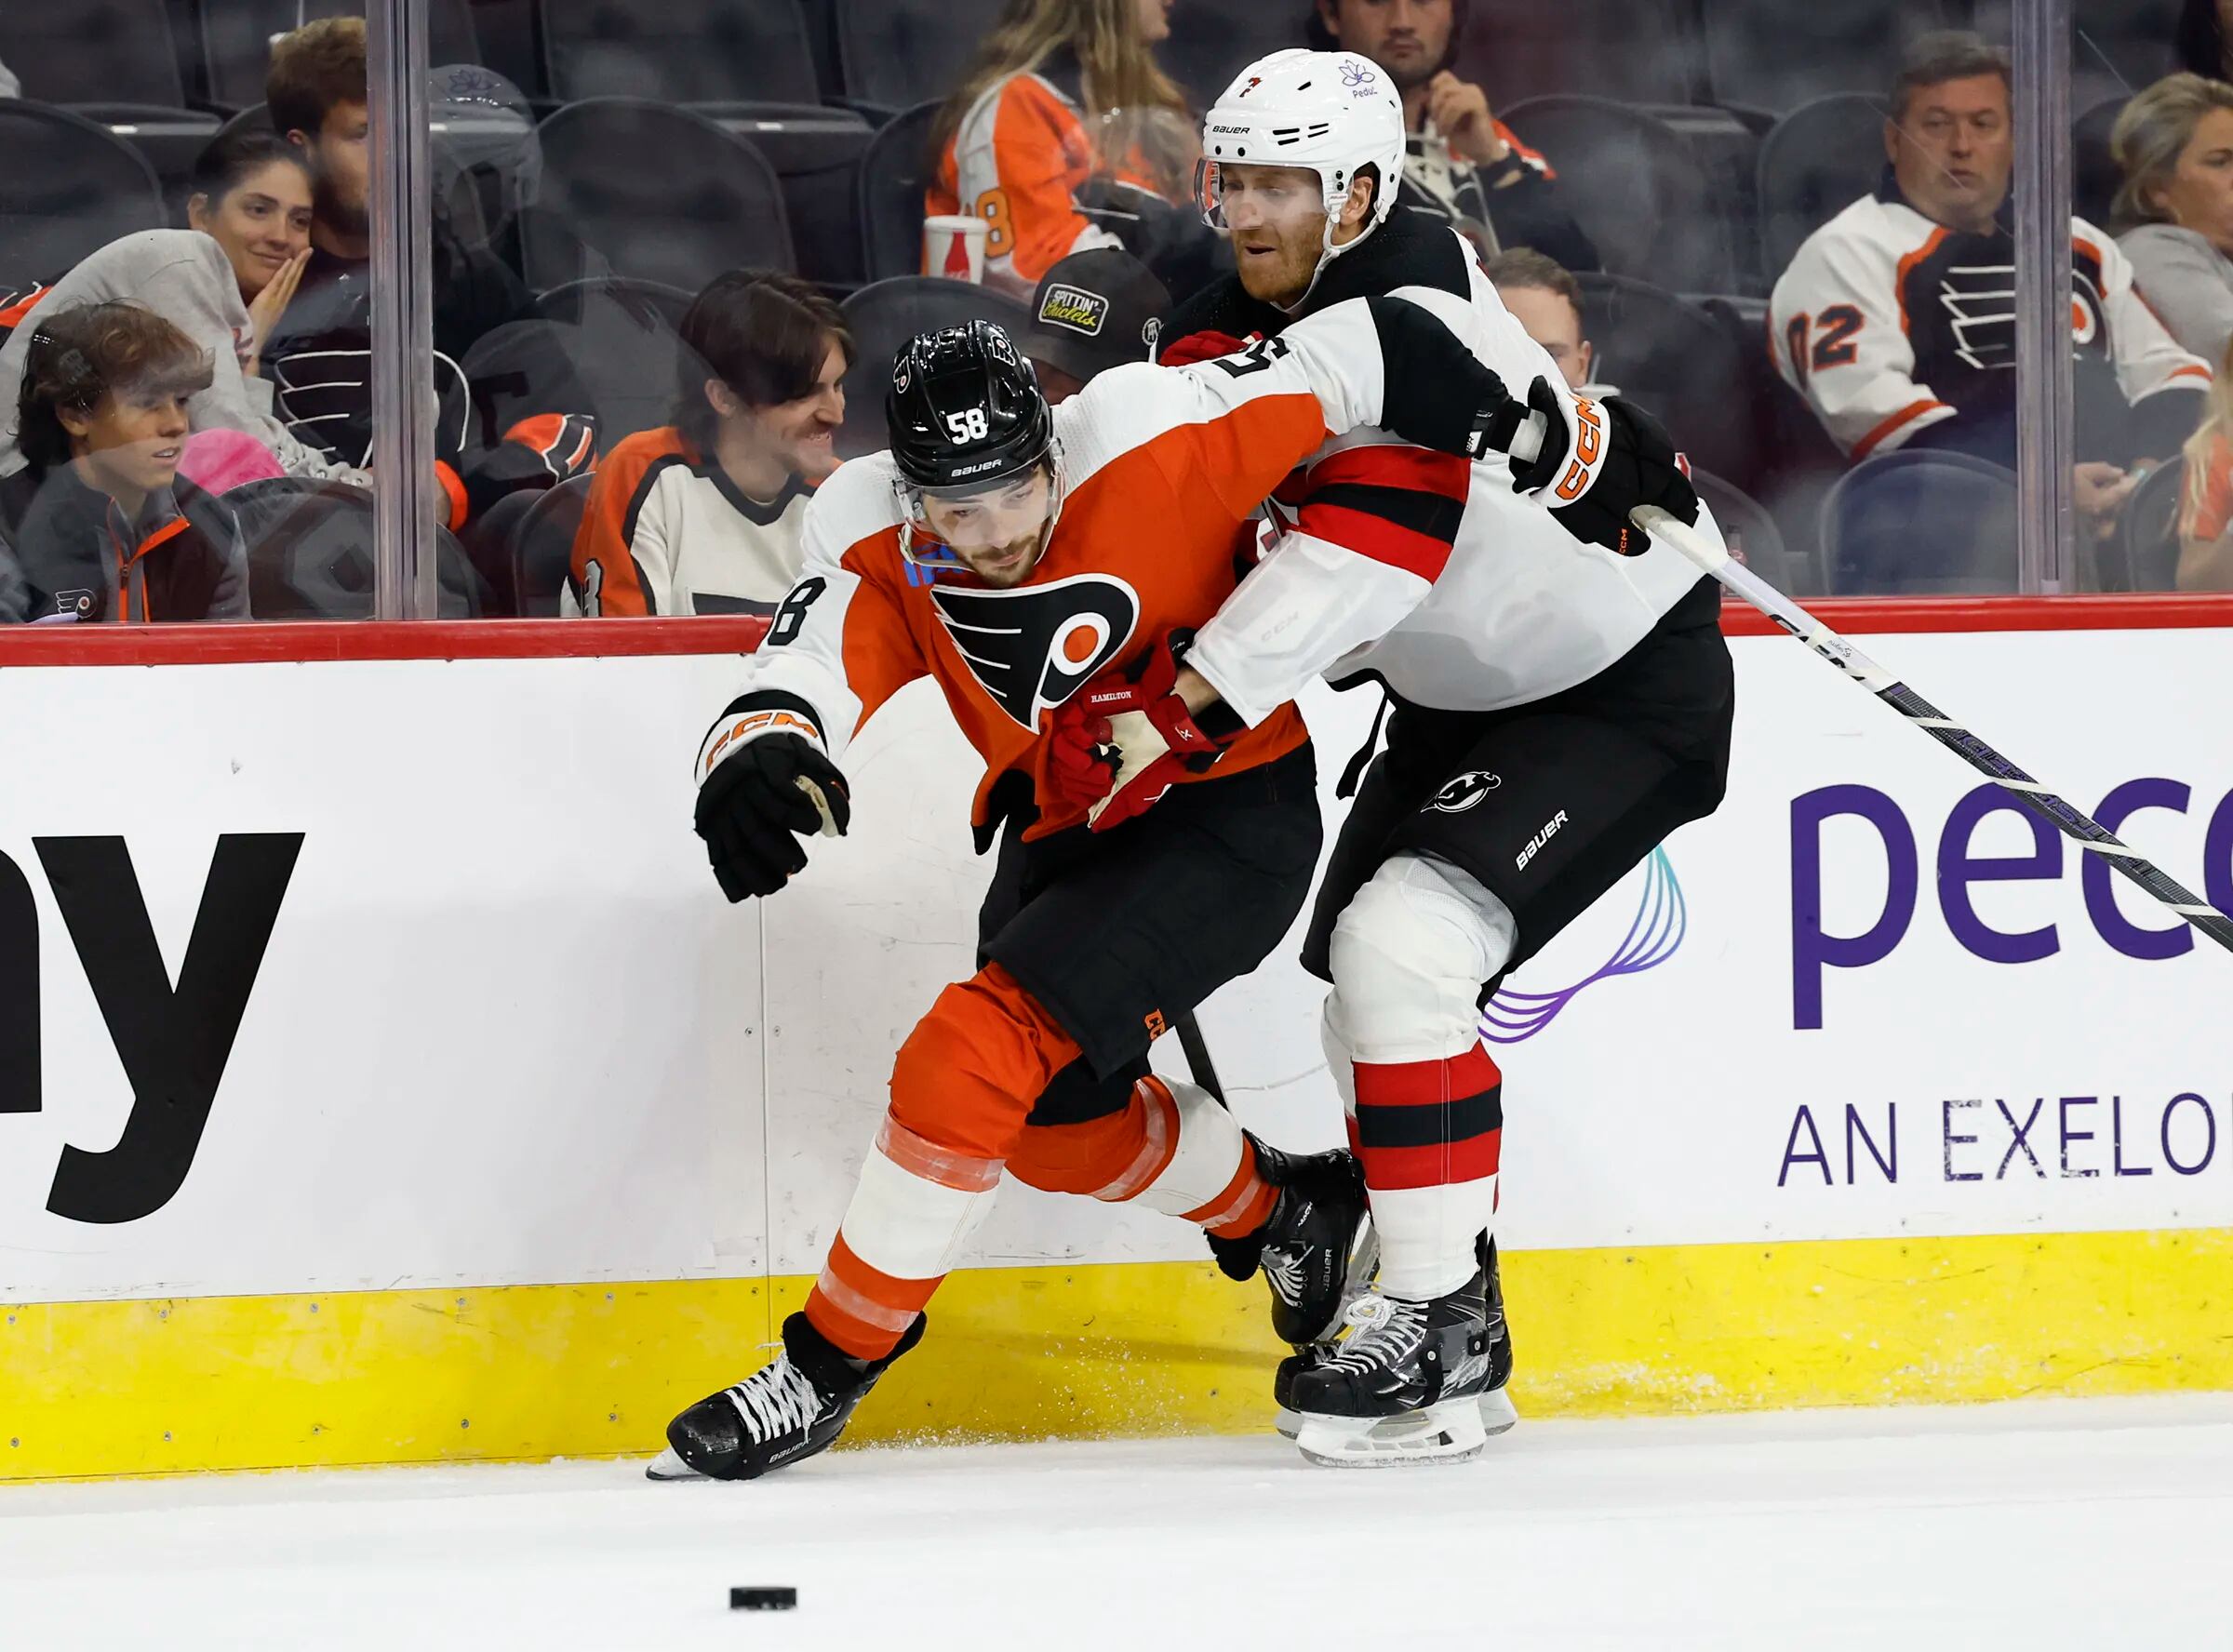 PICTURES: Flyers vs. Devils exhibition game at PPL Center – The Morning Call